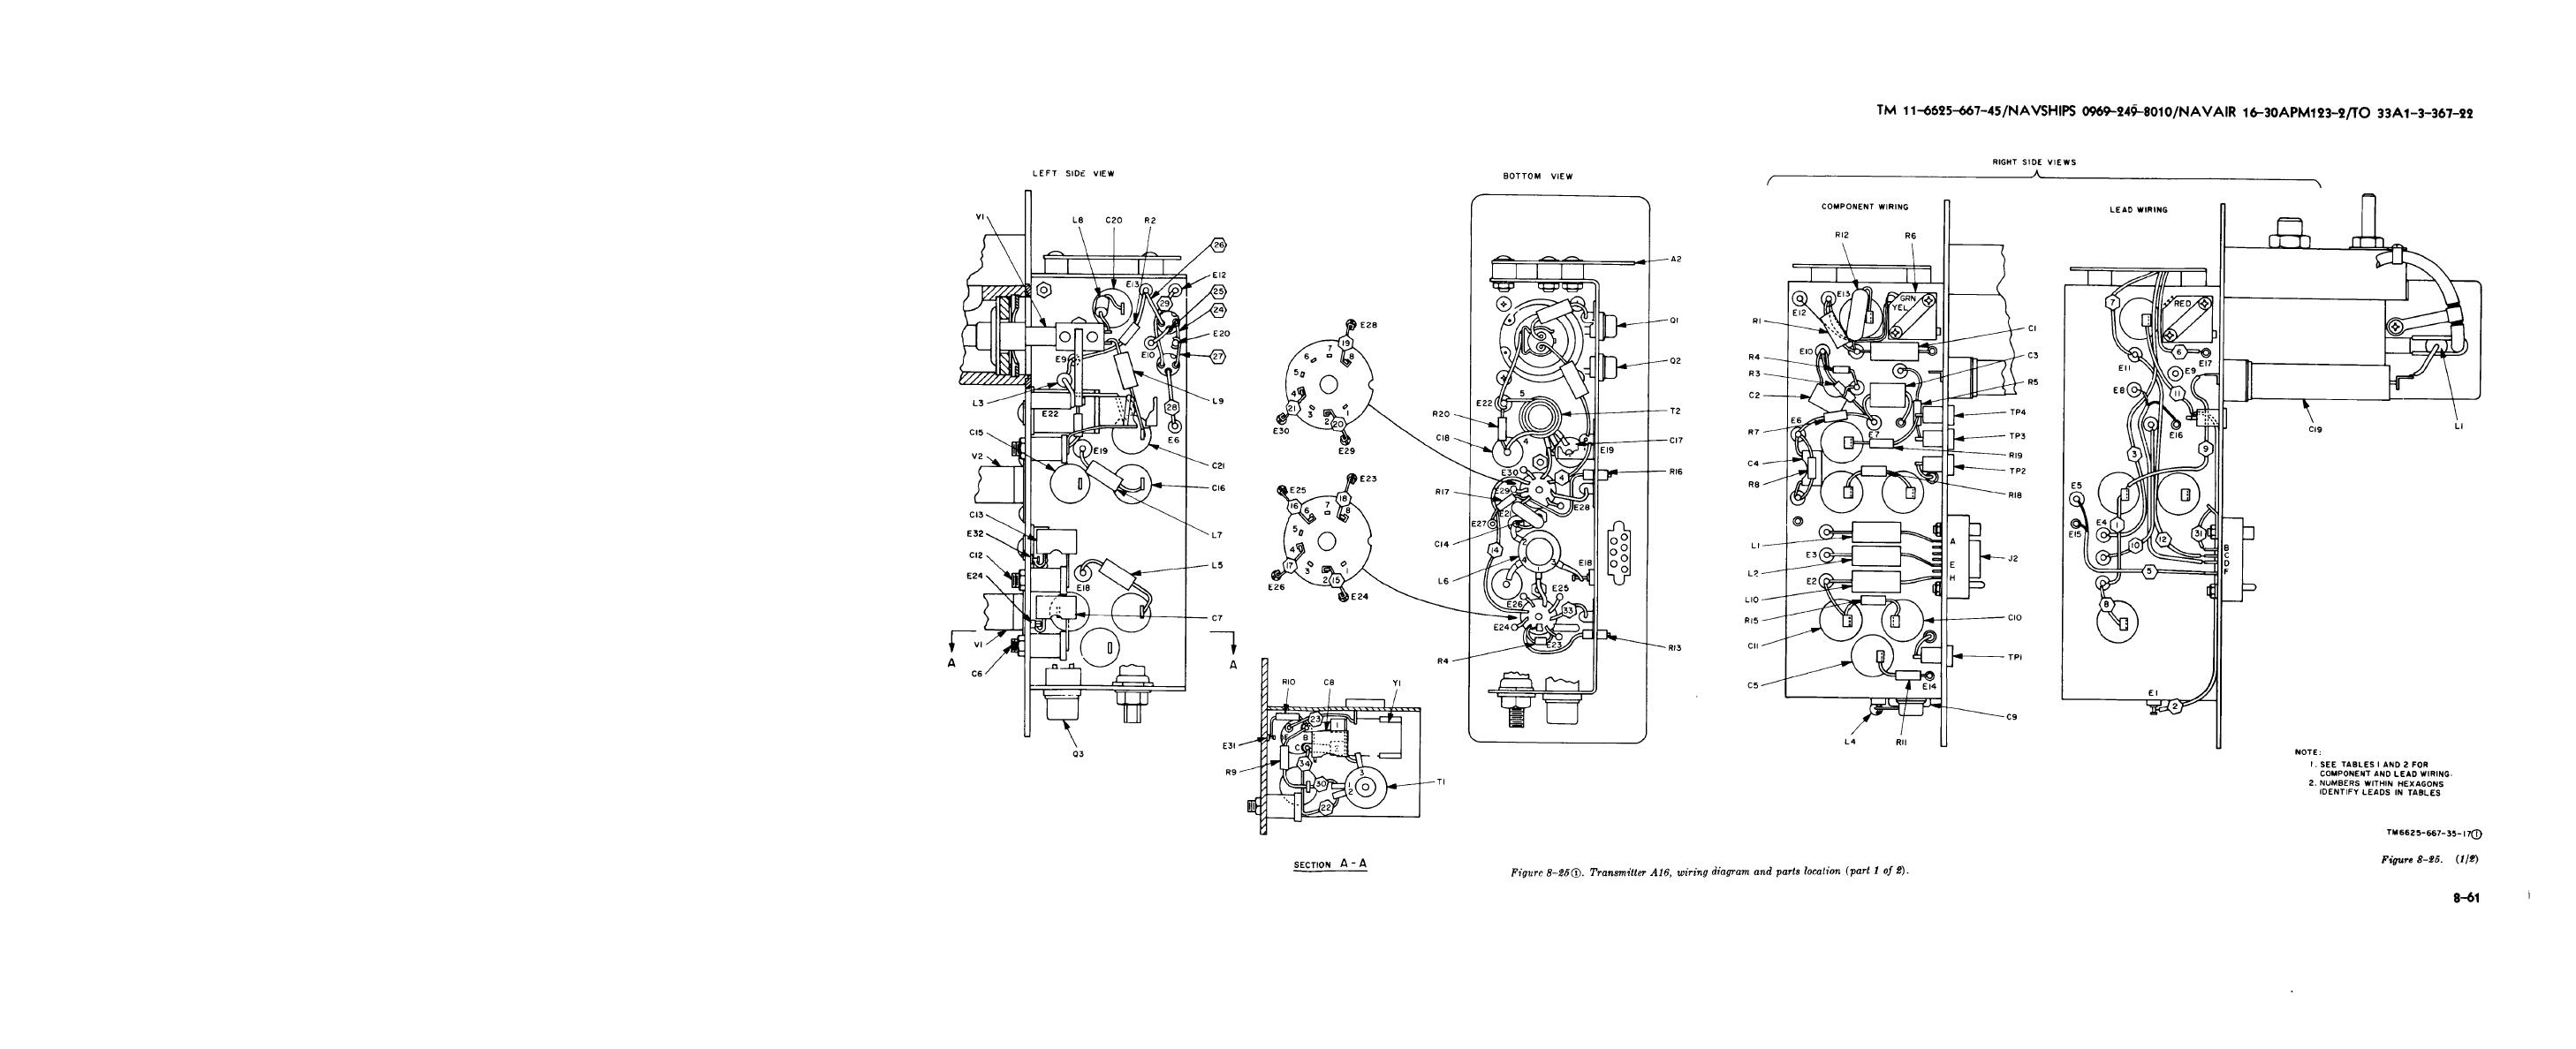 FIGURE 8-25. TRANSMITTER A16, WIRING DIAGRAM AND PARTS LOCATION ( PART